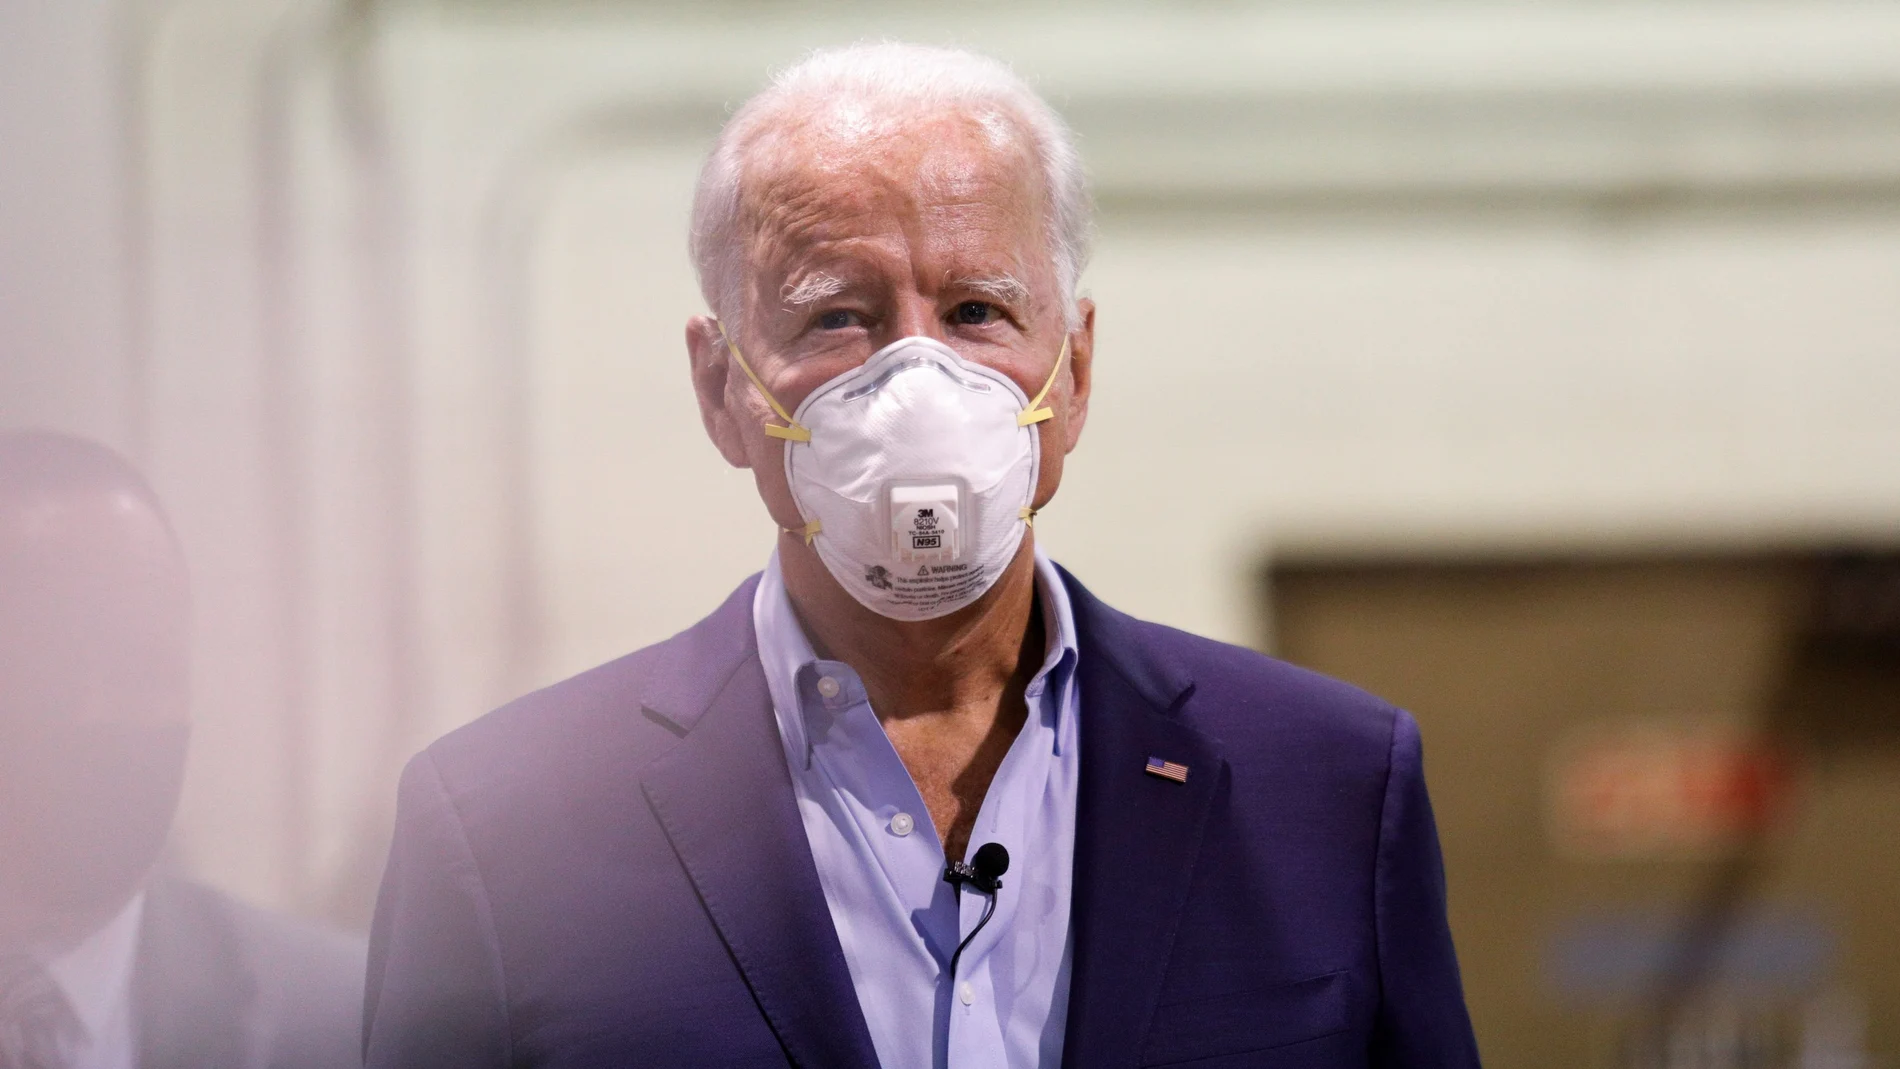 Democratic U.S. presidential candidate Joe Biden wears a protective face mask as he tours a metal works plant in Dunmore, Pennsylvania